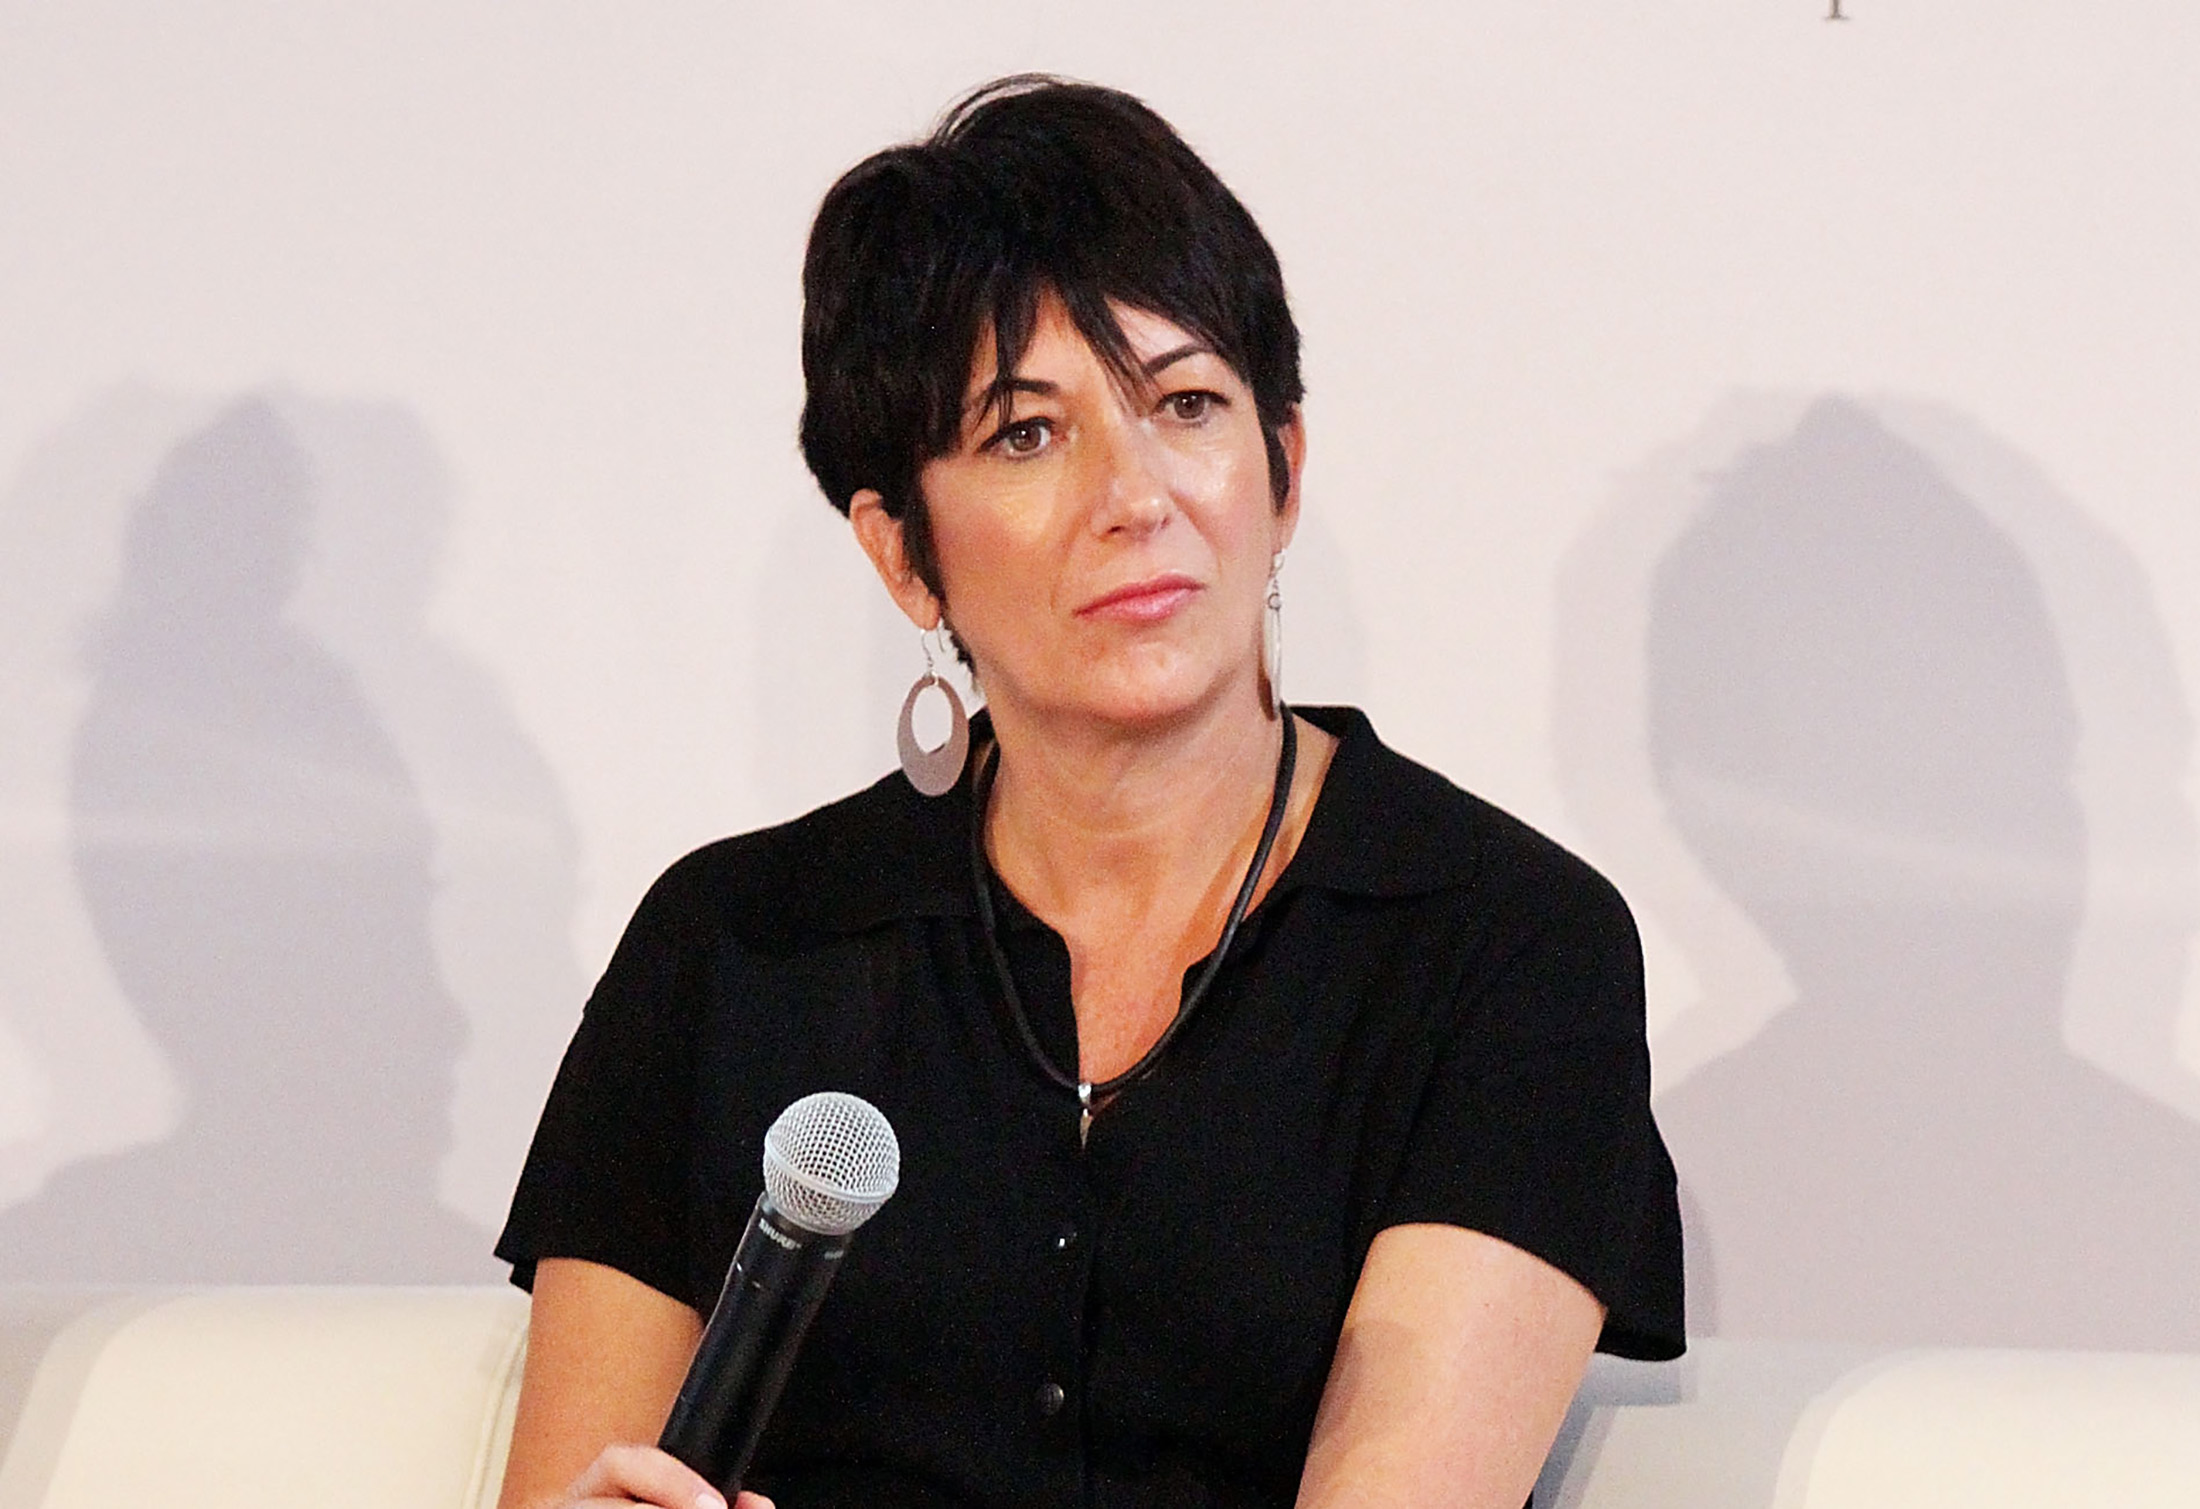 Ghislaine Maxwell Doesn't Want Epstein 'Little Black Book' Shown at Trial